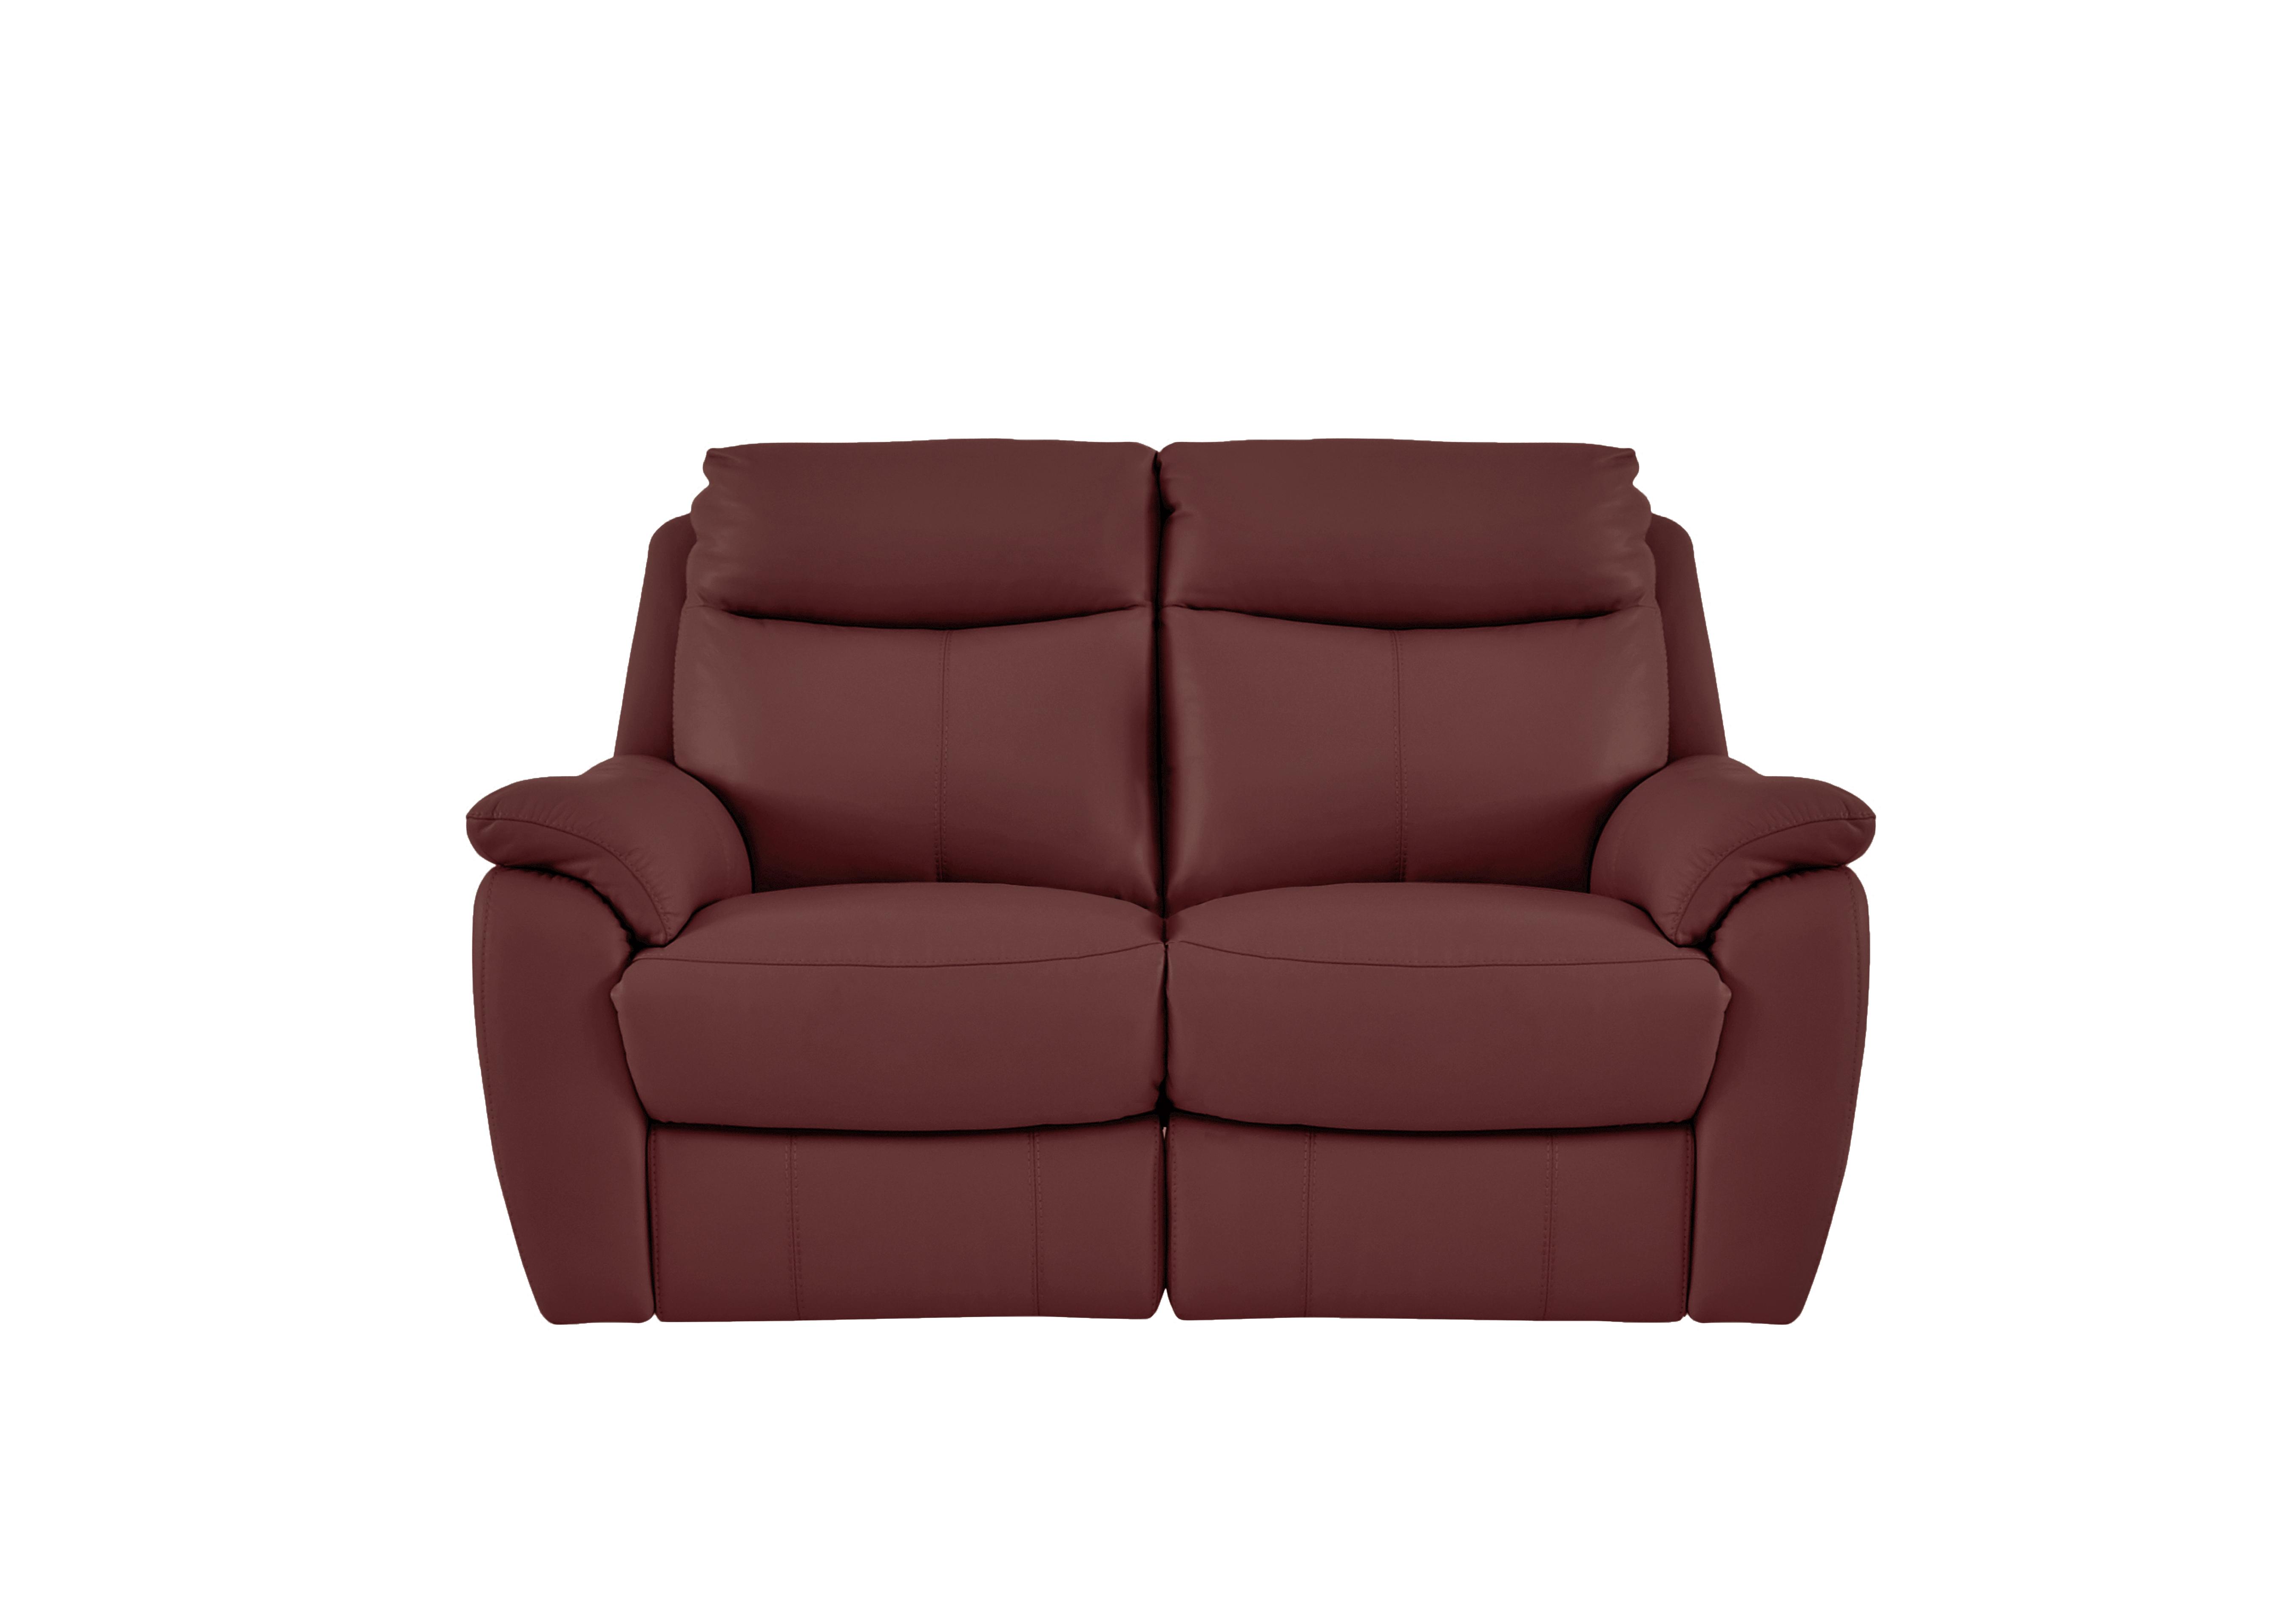 Snug 2 Seater Leather Sofa in Bv-035c Deep Red on Furniture Village